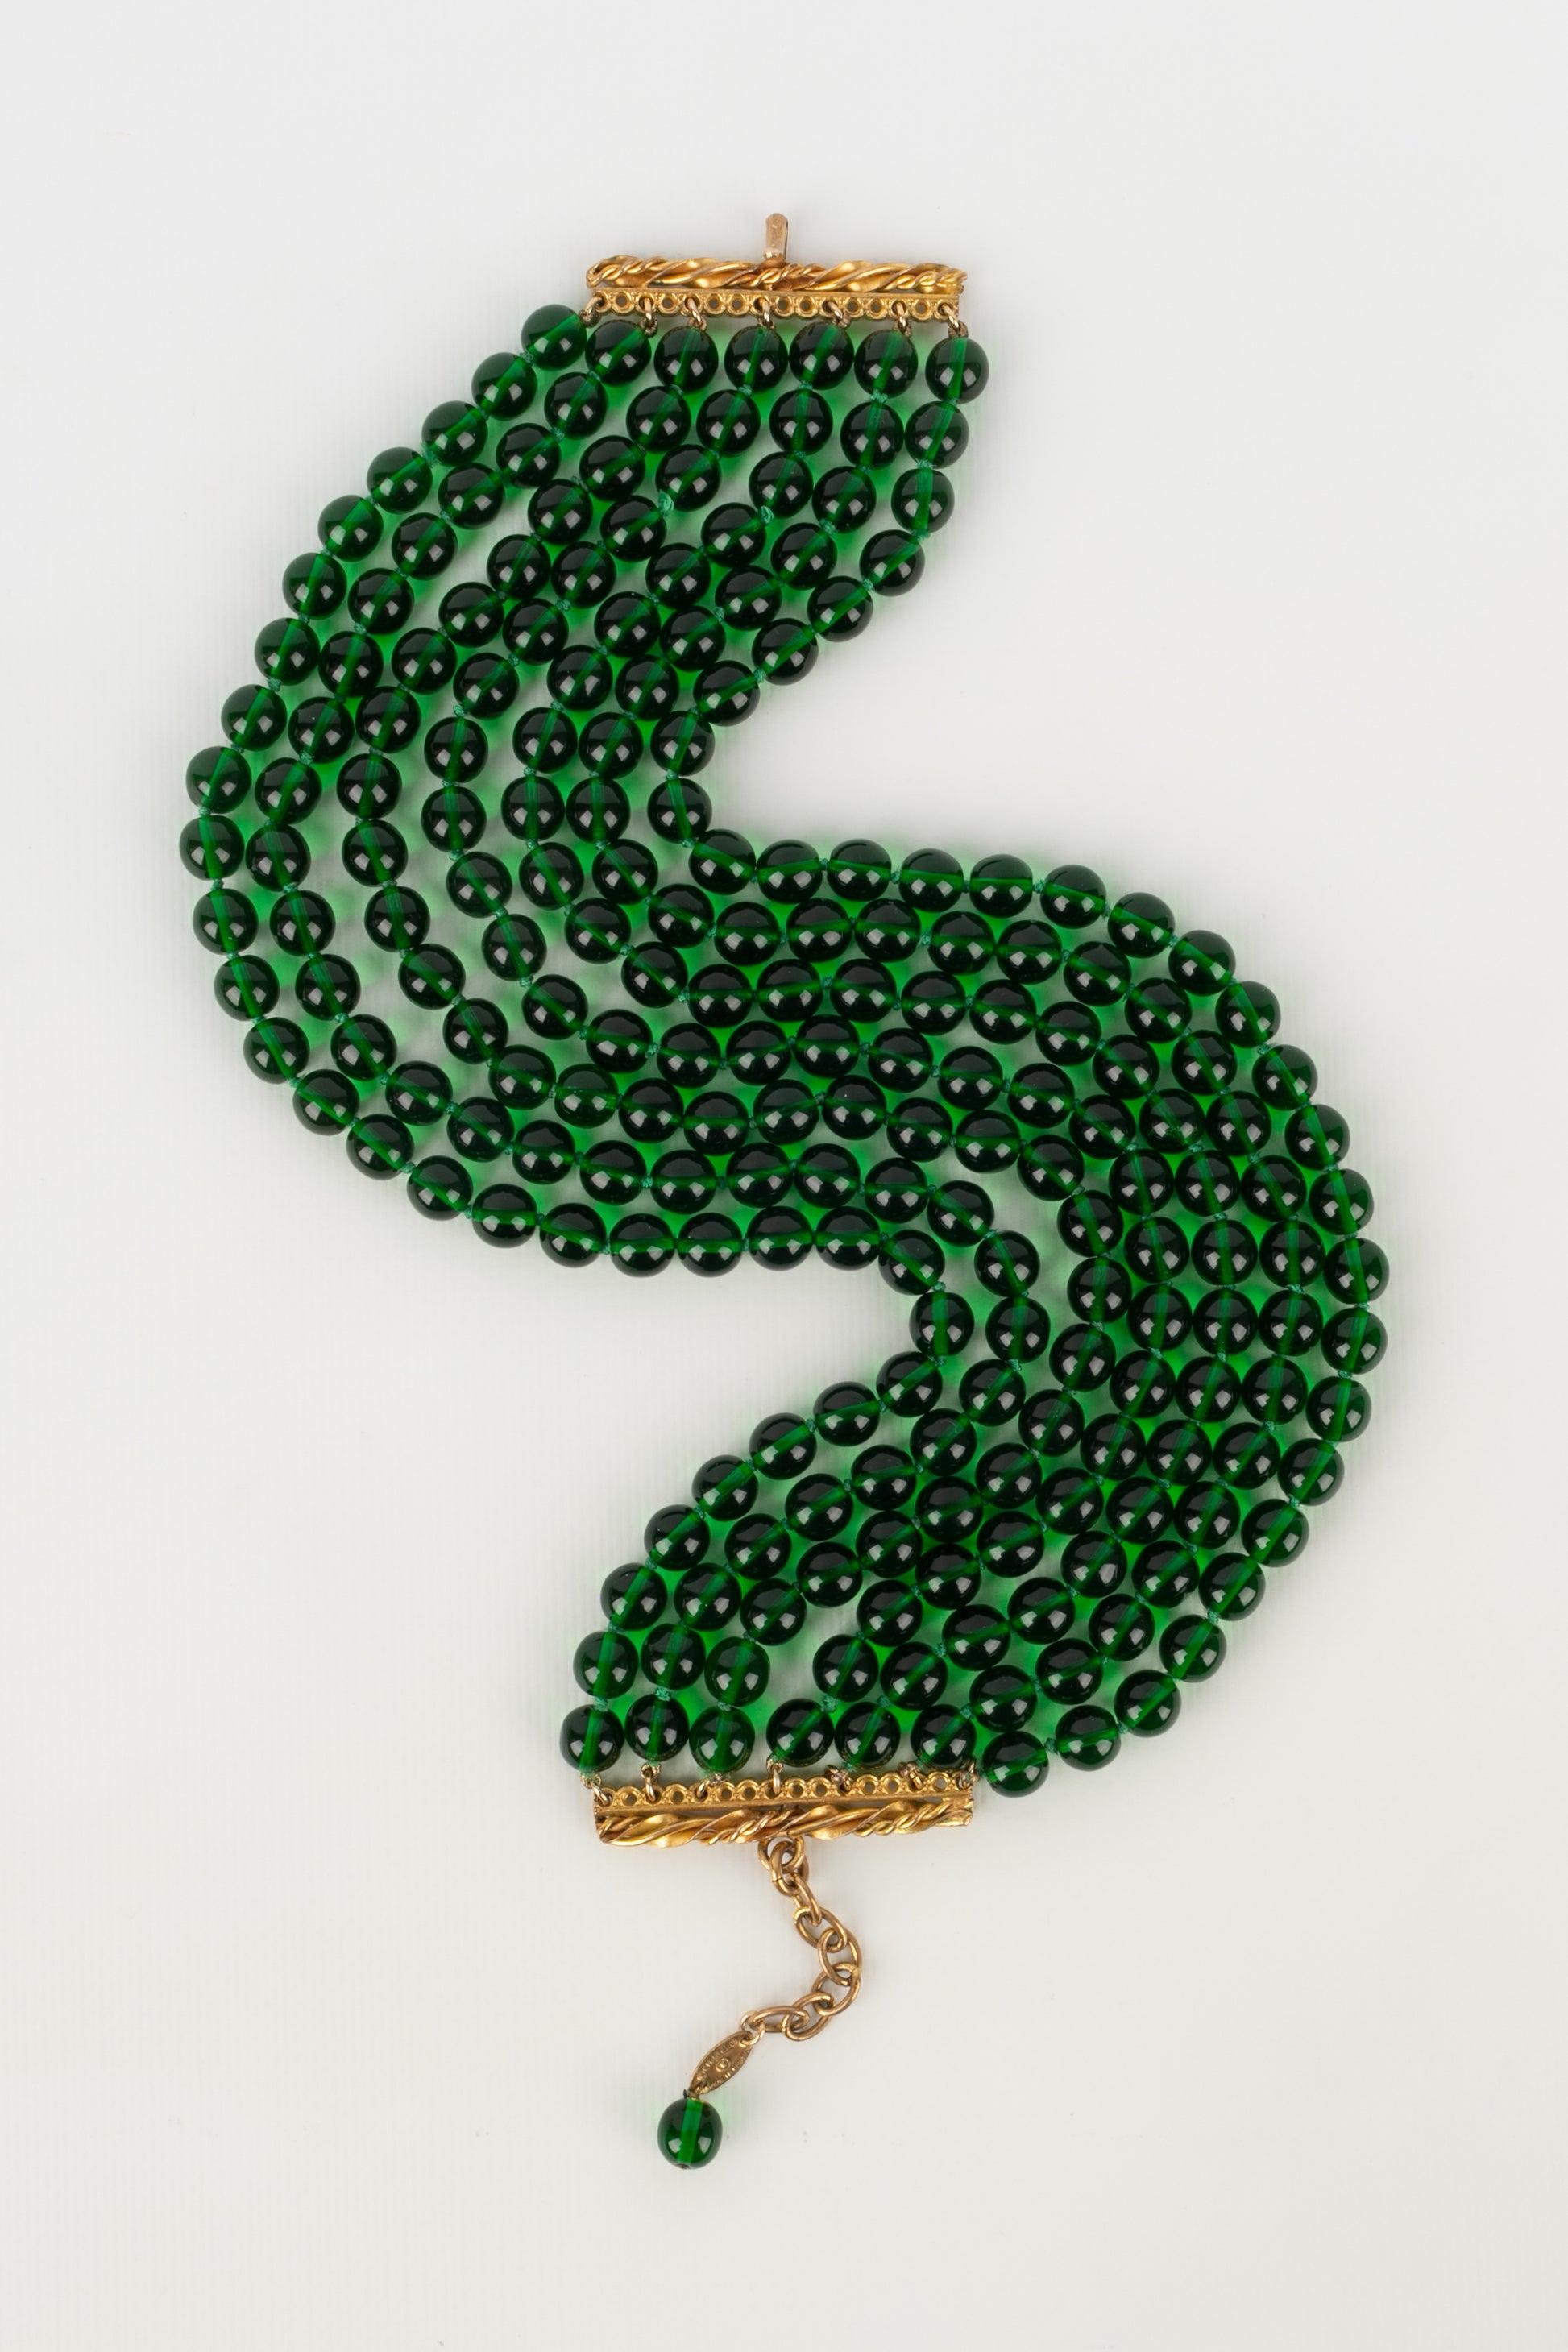 Chanel Short Necklace Made Up of Several Rows of Green Glass Beads, 1980s In Excellent Condition For Sale In SAINT-OUEN-SUR-SEINE, FR